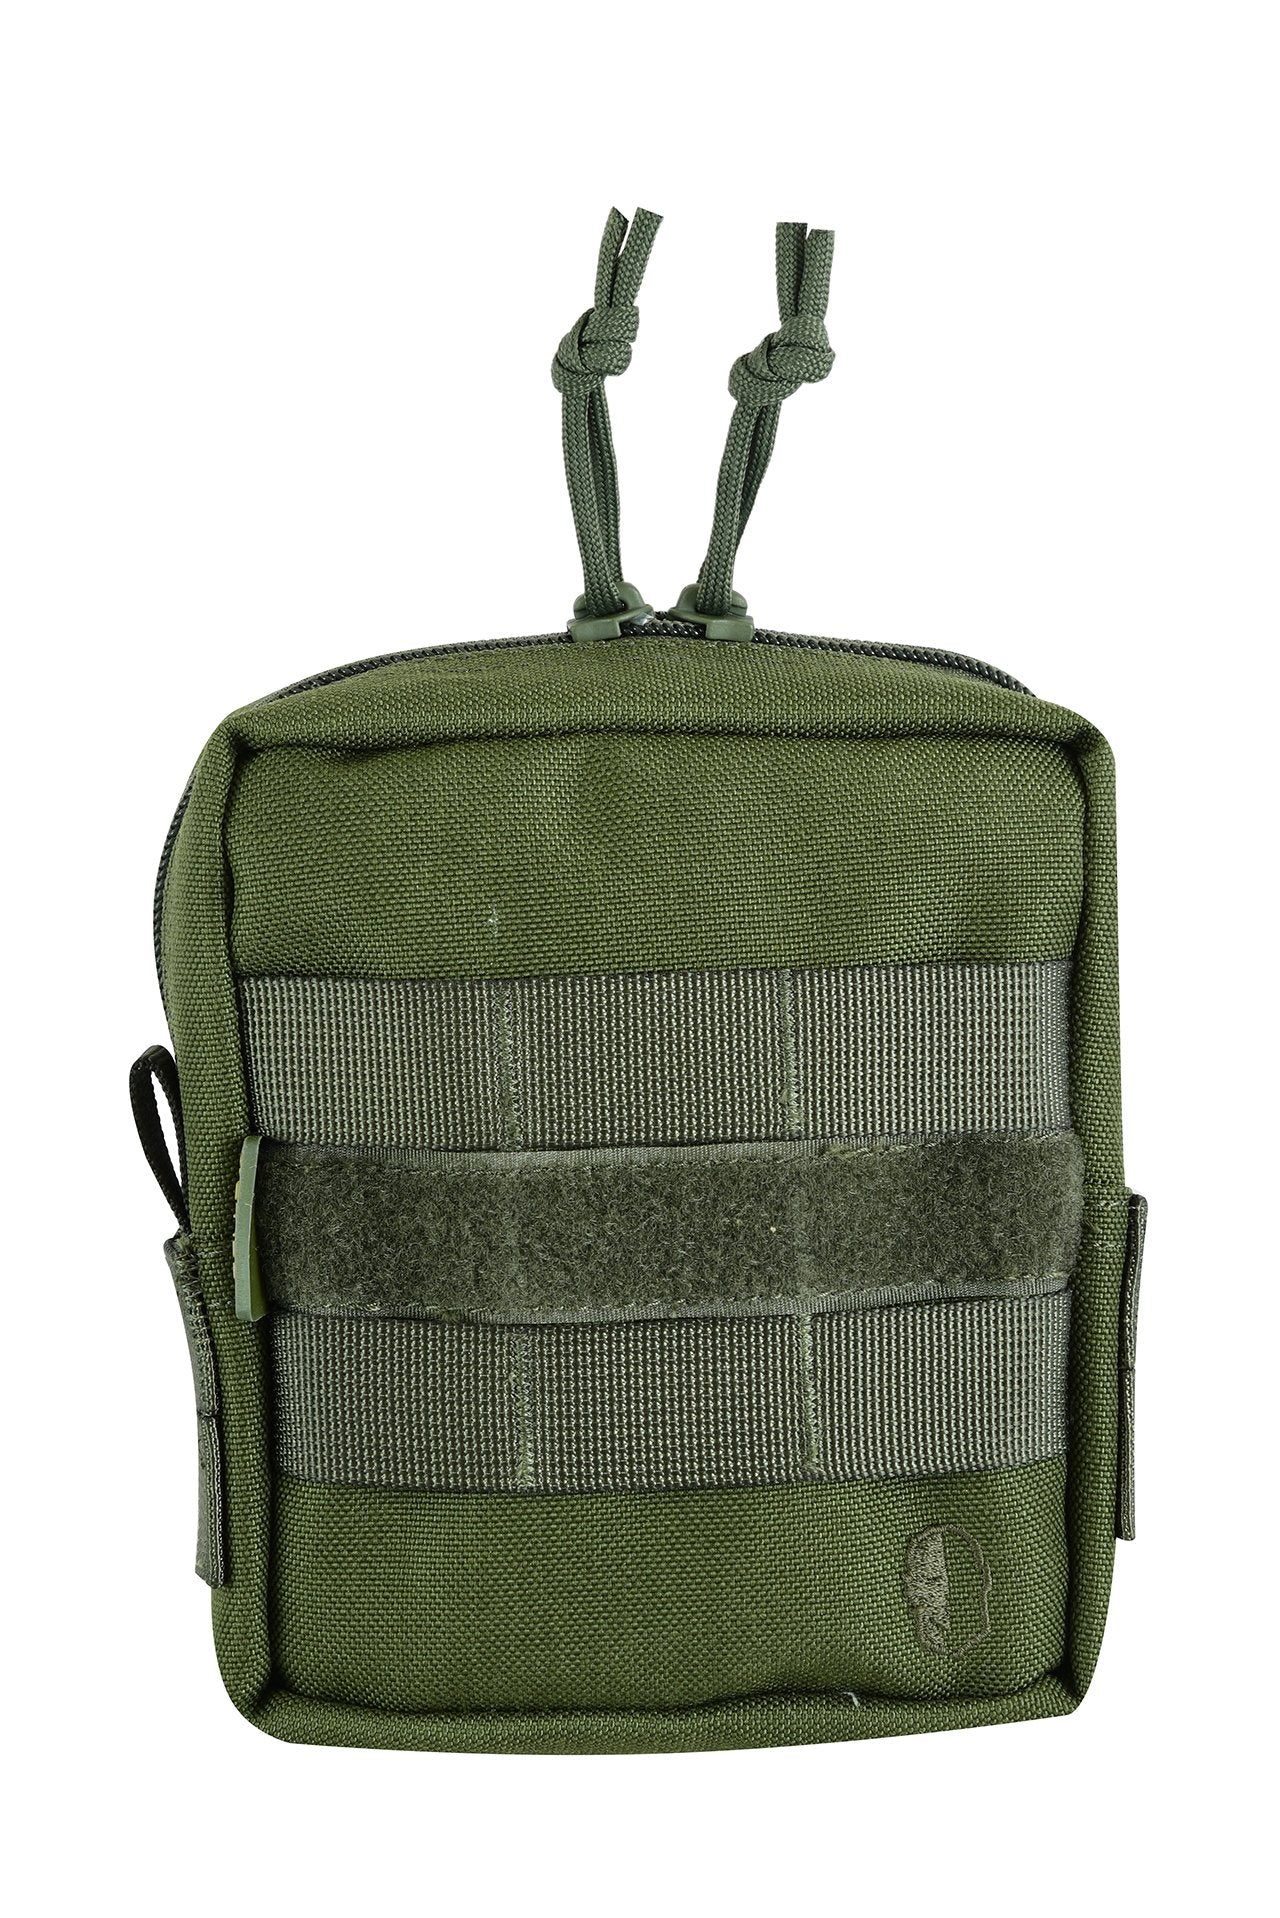 SHE-23033 SMALL  UTILITY  POUCH OD GREEN